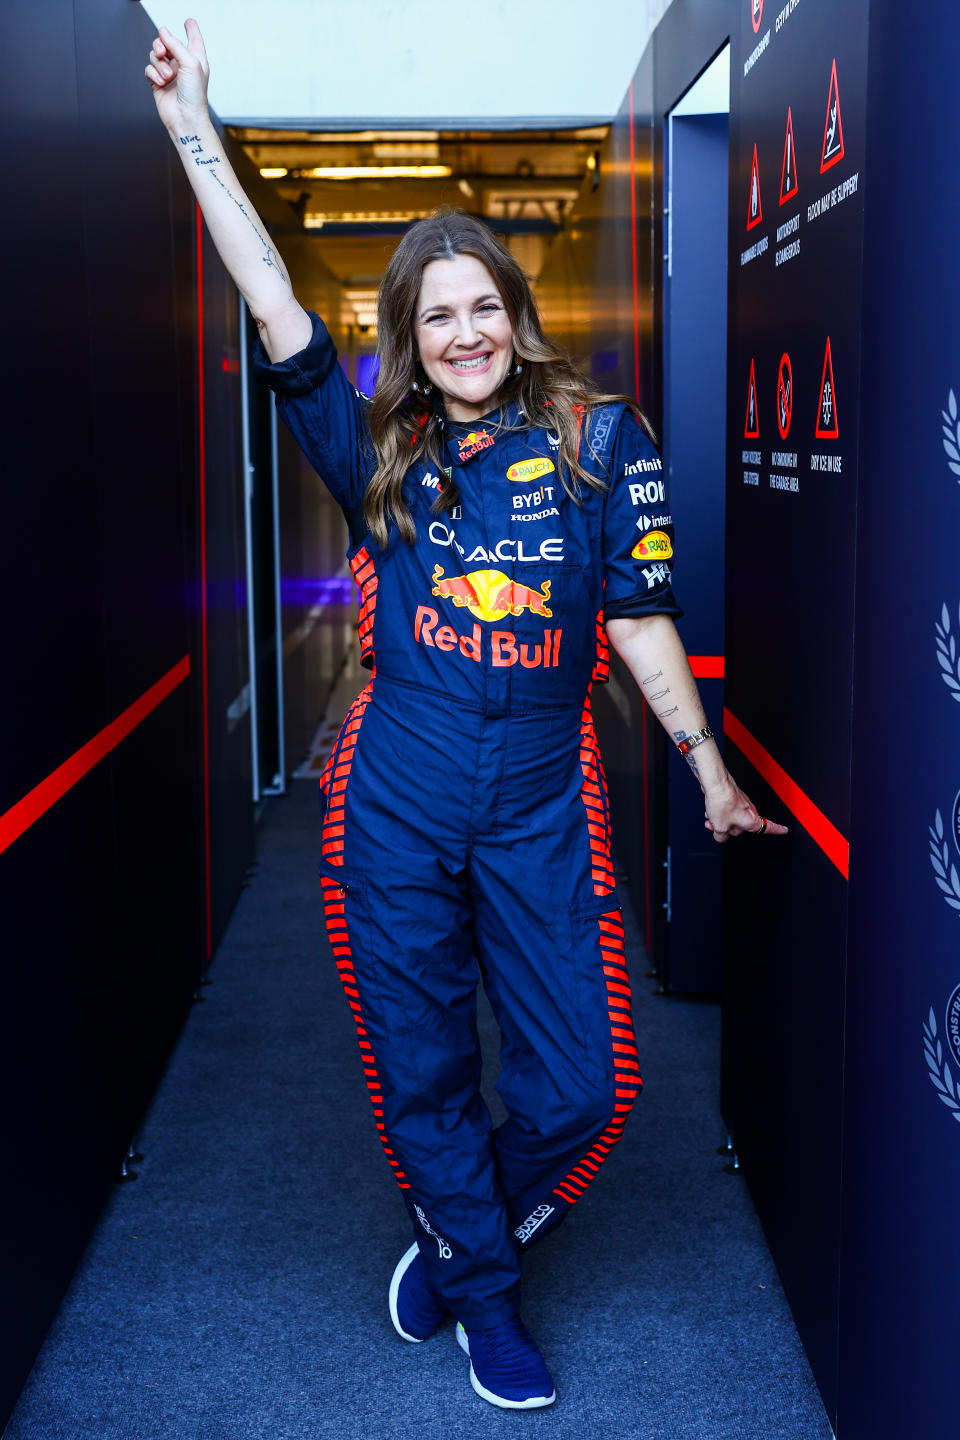 AUSTIN, TEXAS - OCTOBER 19: Drew Barrymore poses for a photo in the Red Bull Racing garage during previews ahead of the F1 Grand Prix of United States at Circuit of The Americas on October 19, 2023 in Austin, Texas. (Photo by Mark Thompson/Getty Images)